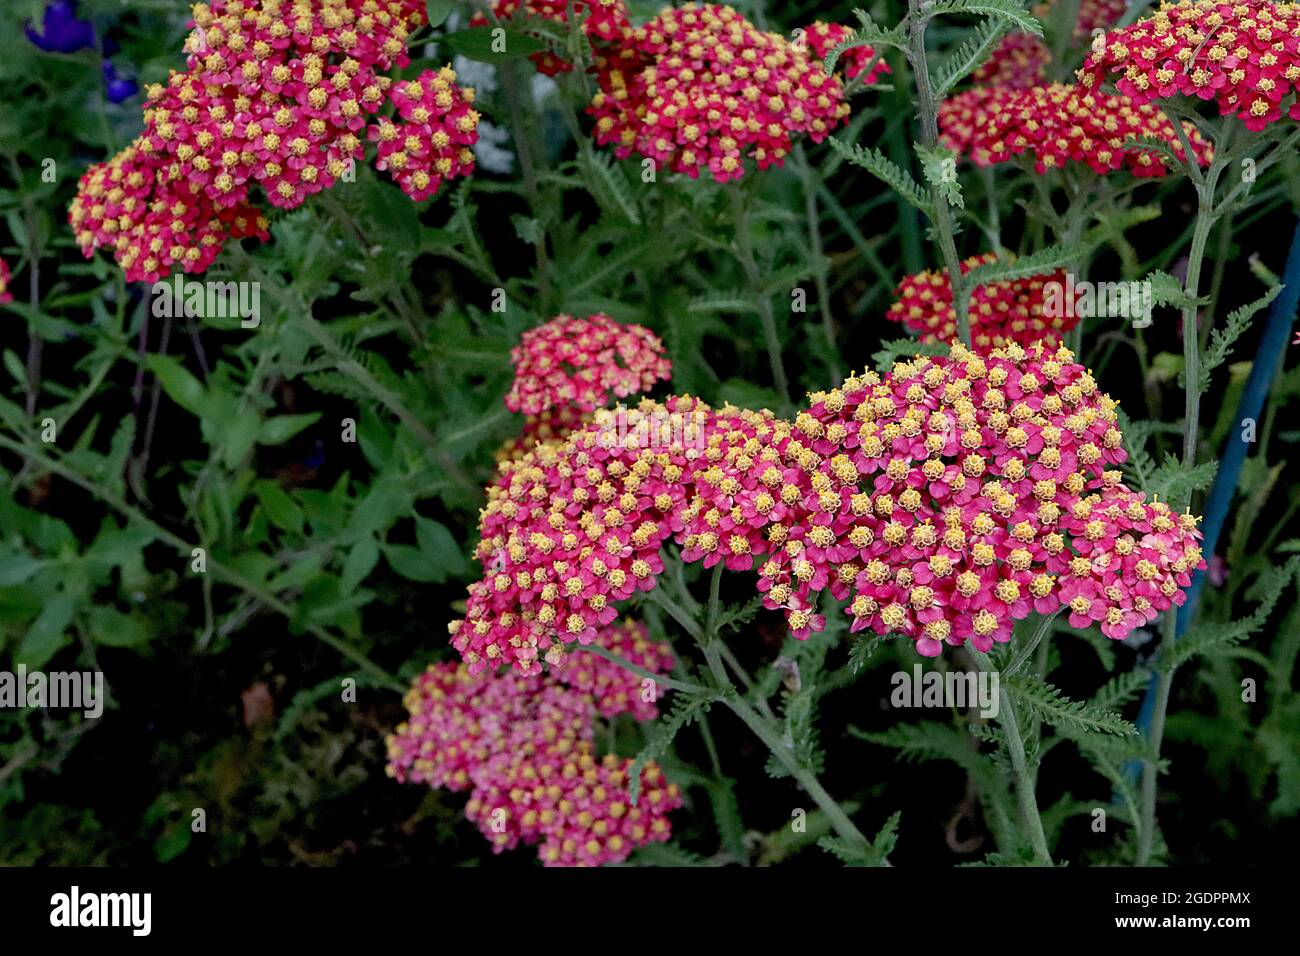 Achillea millefolium ‘Fanal’ yarrow Fanal - dense flat flower heads of tiny red and crimson flowers and ferny grey green leaves,  July, England, UK Stock Photo